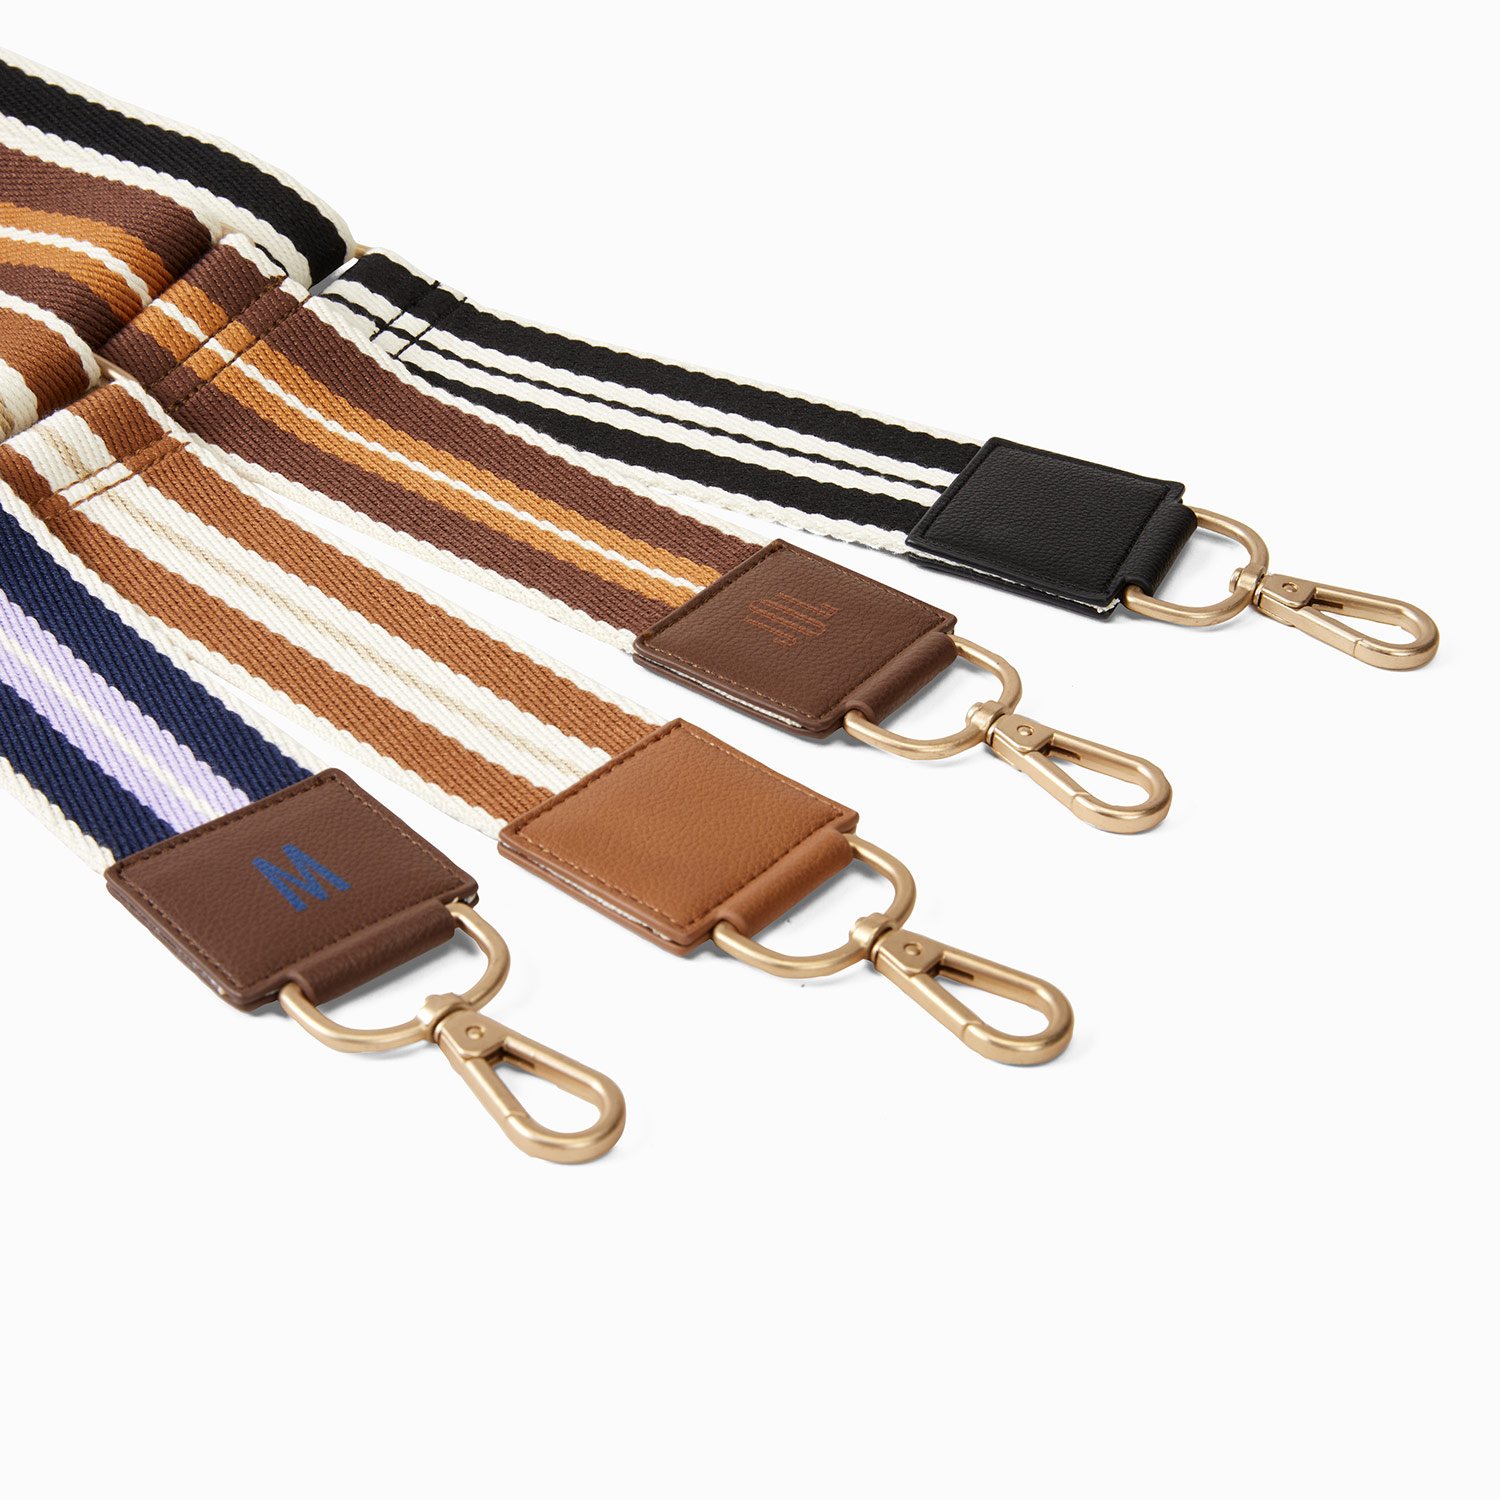 Crossbody Bags + Straps That You Can Mix and Match